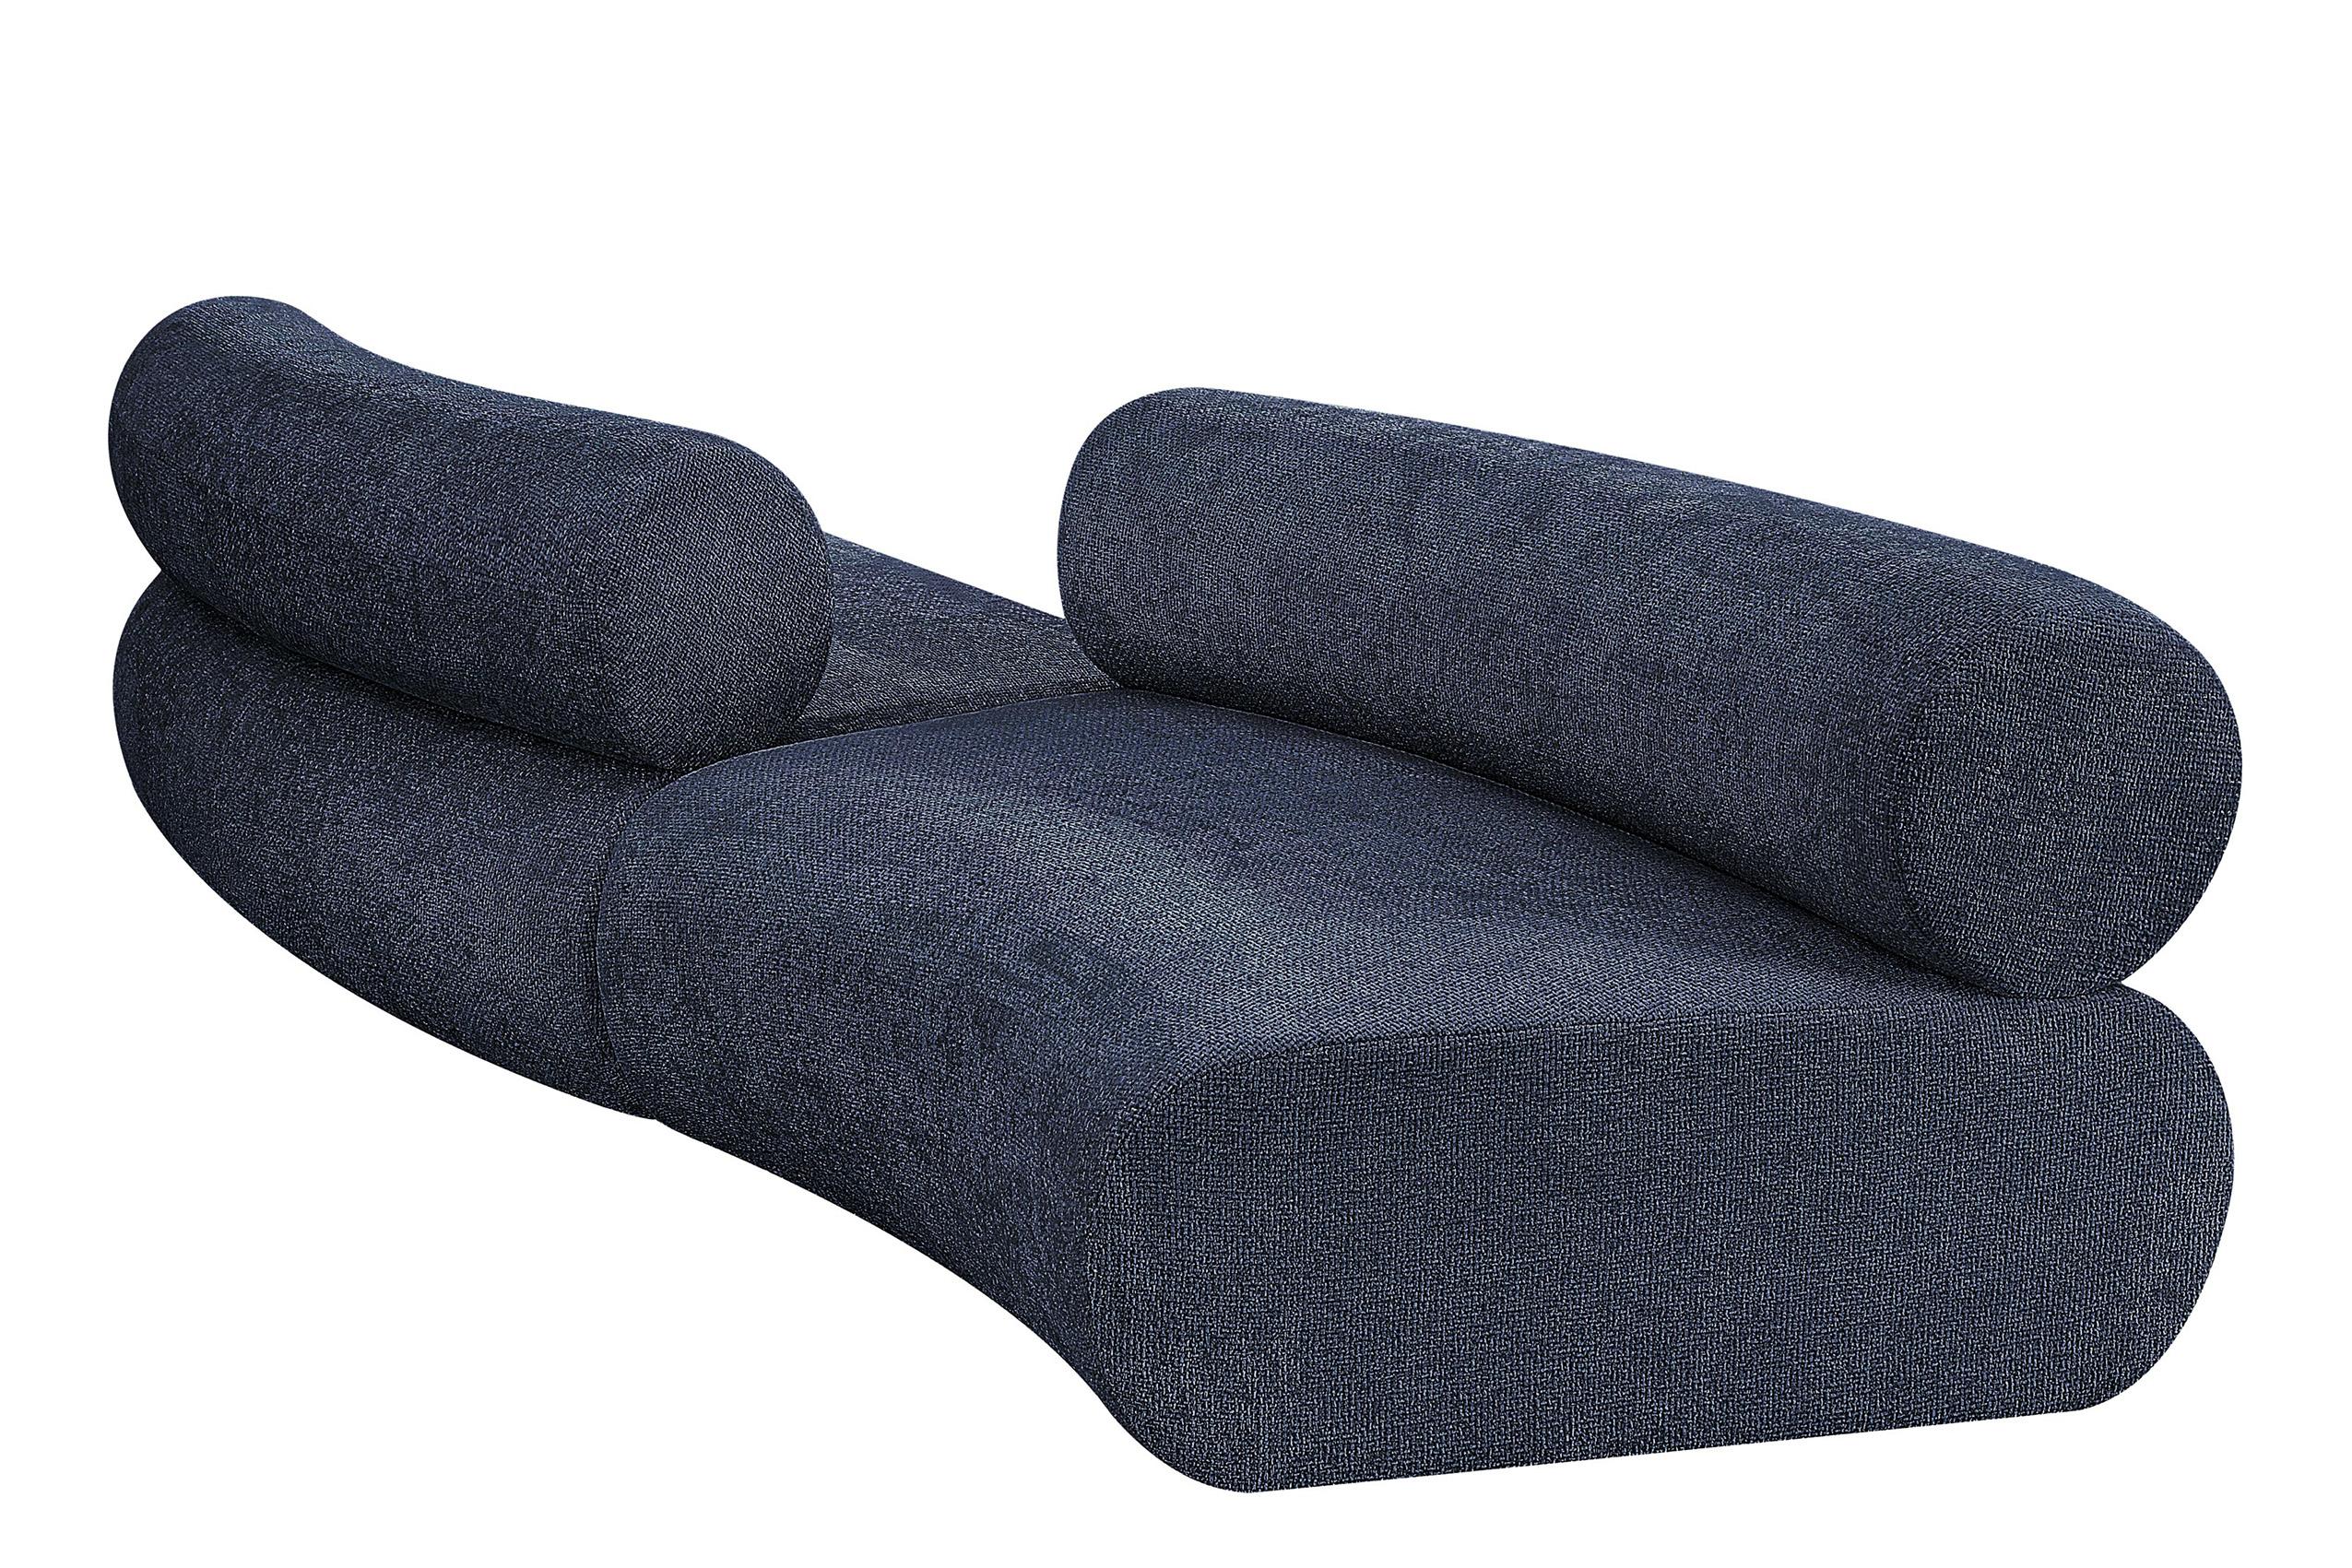 Contemporary, Modern Modular Sectional Sofa Bale 114Navy-S2B 114Navy-S2B in Navy Chenille